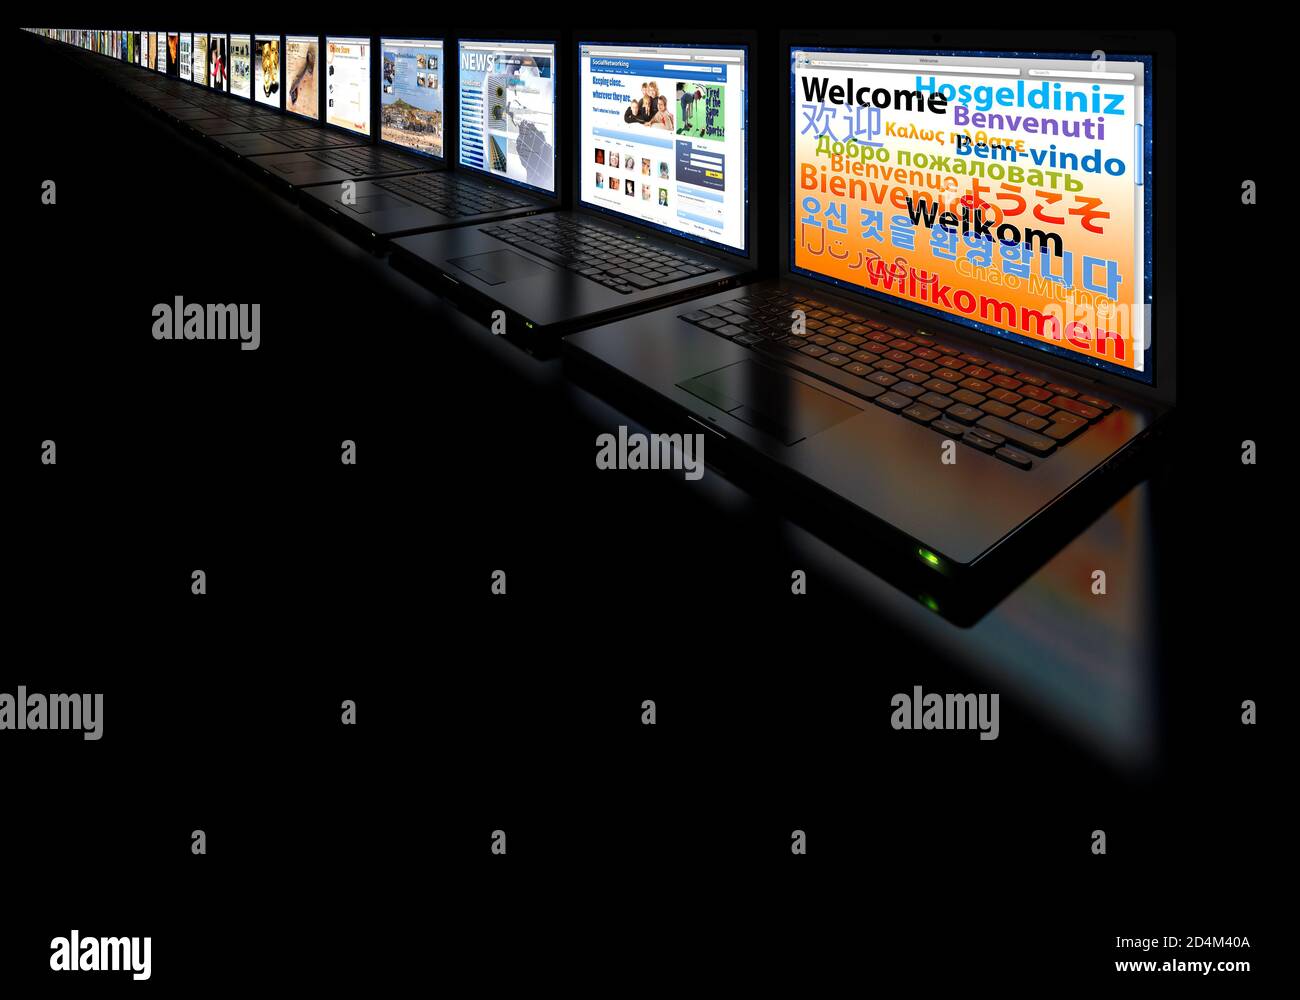 Lap top computer screens, social media, networking, black background, isolated, Laptop, internet, e commerce, e mail, website, interconnected Stock Photo